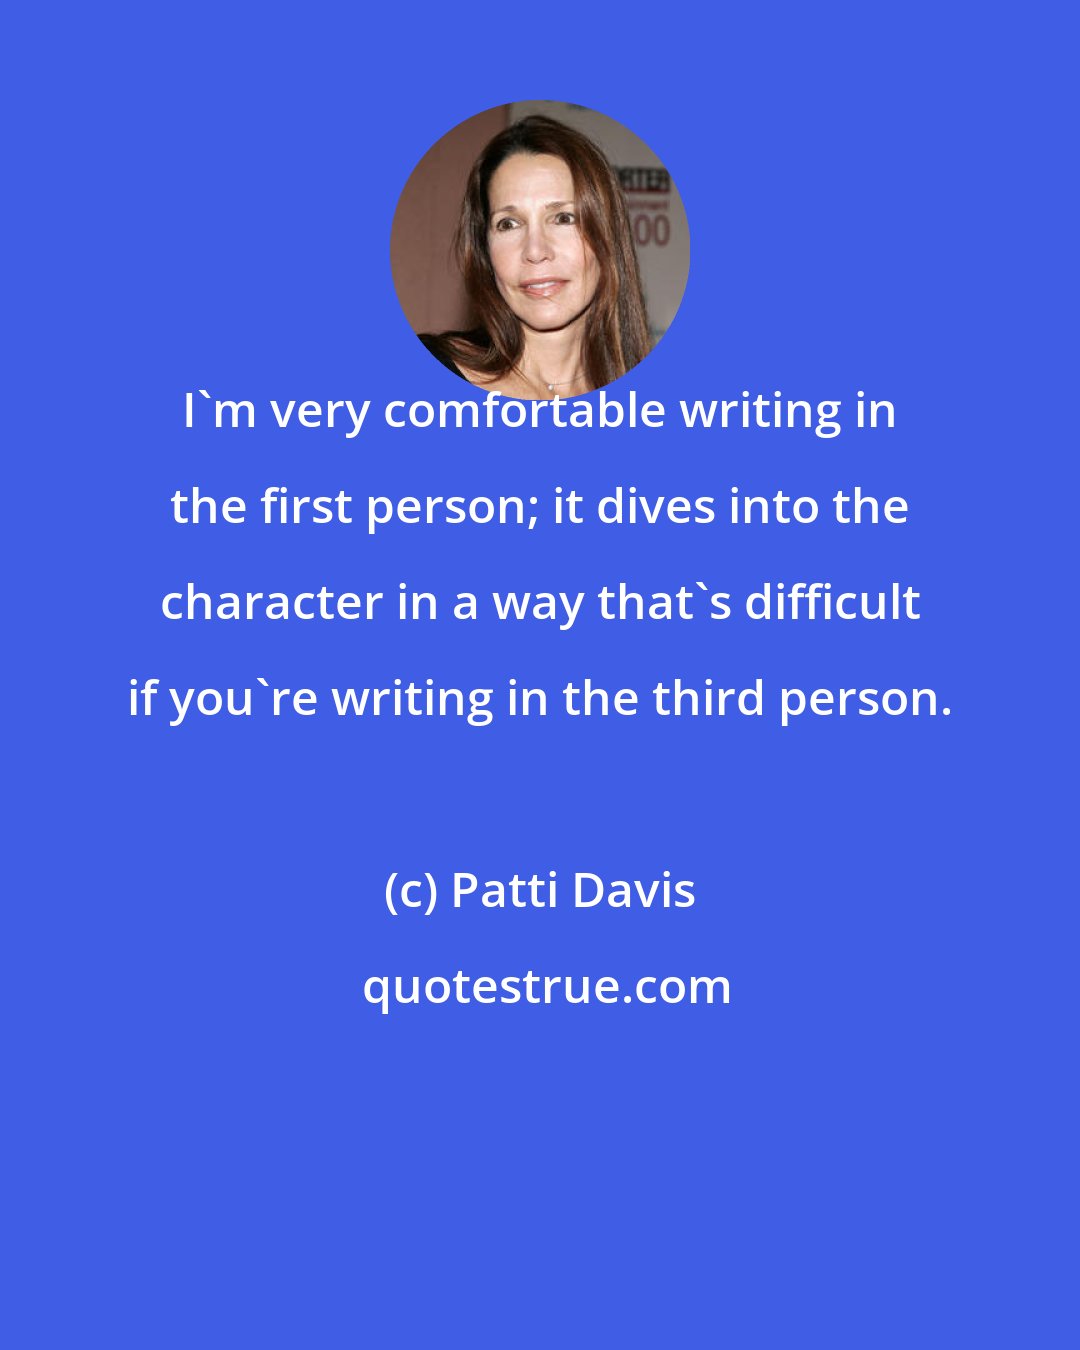 Patti Davis: I'm very comfortable writing in the first person; it dives into the character in a way that's difficult if you're writing in the third person.